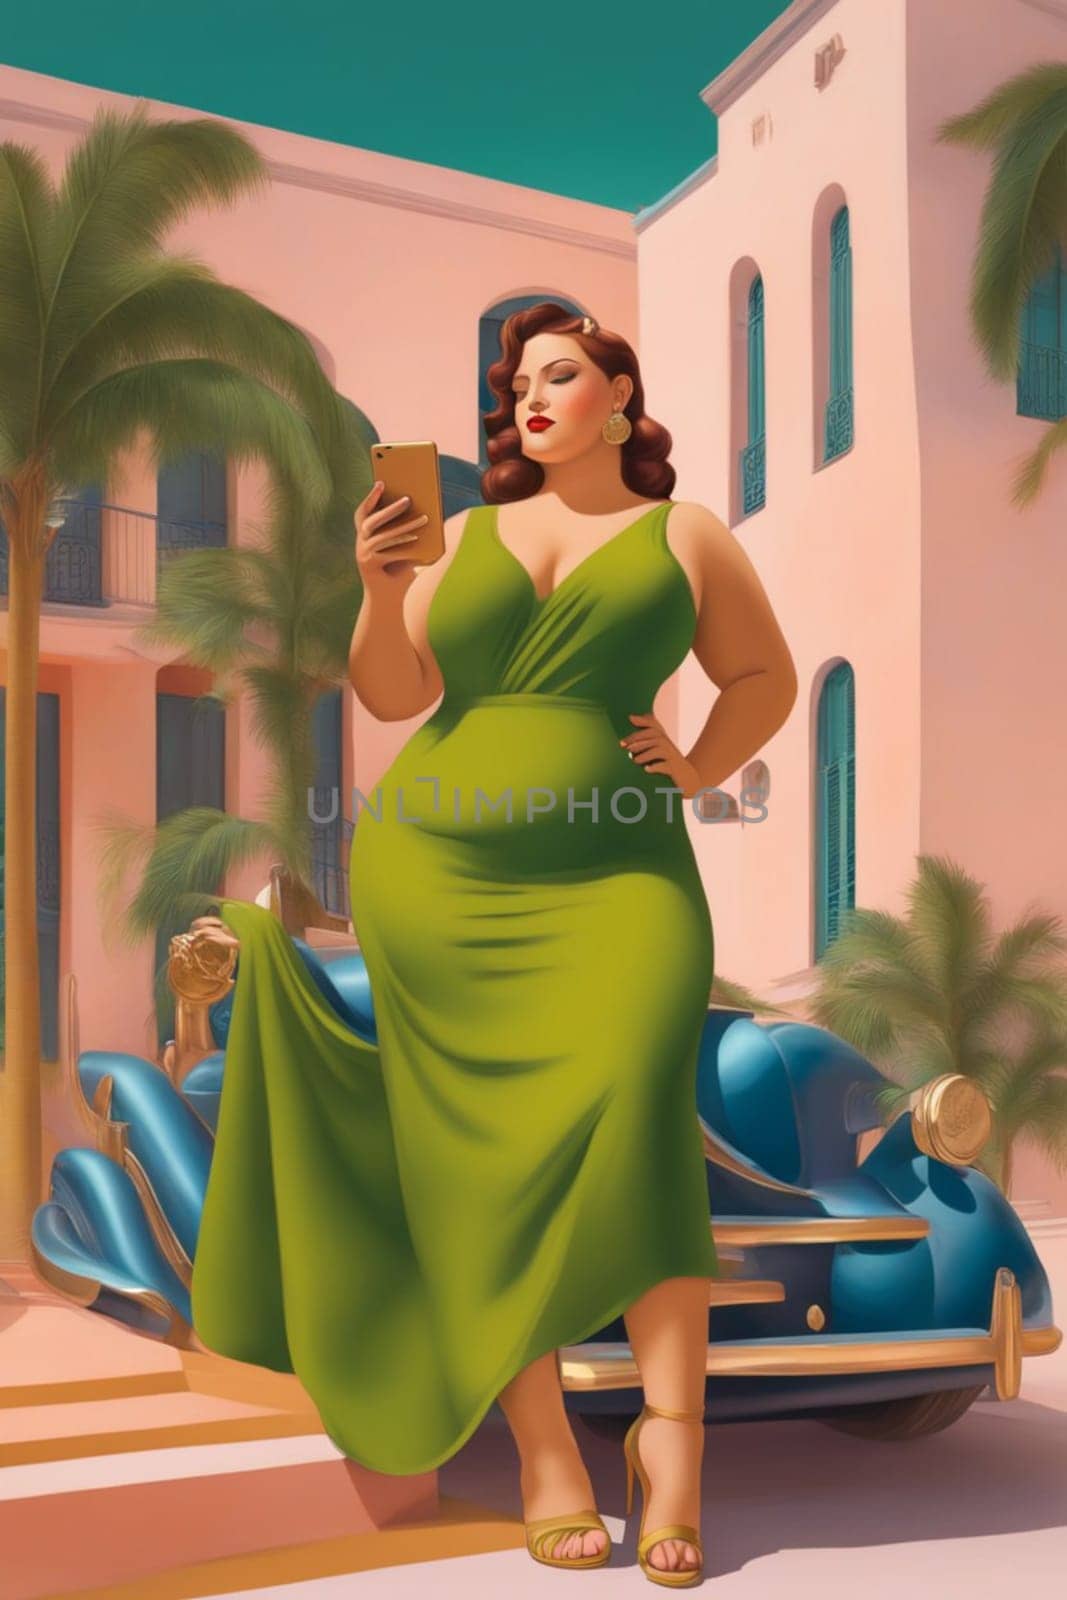 iilustration poster of voluptous female model using smartphone outdoors in a yard in caribbean villa generative ai art